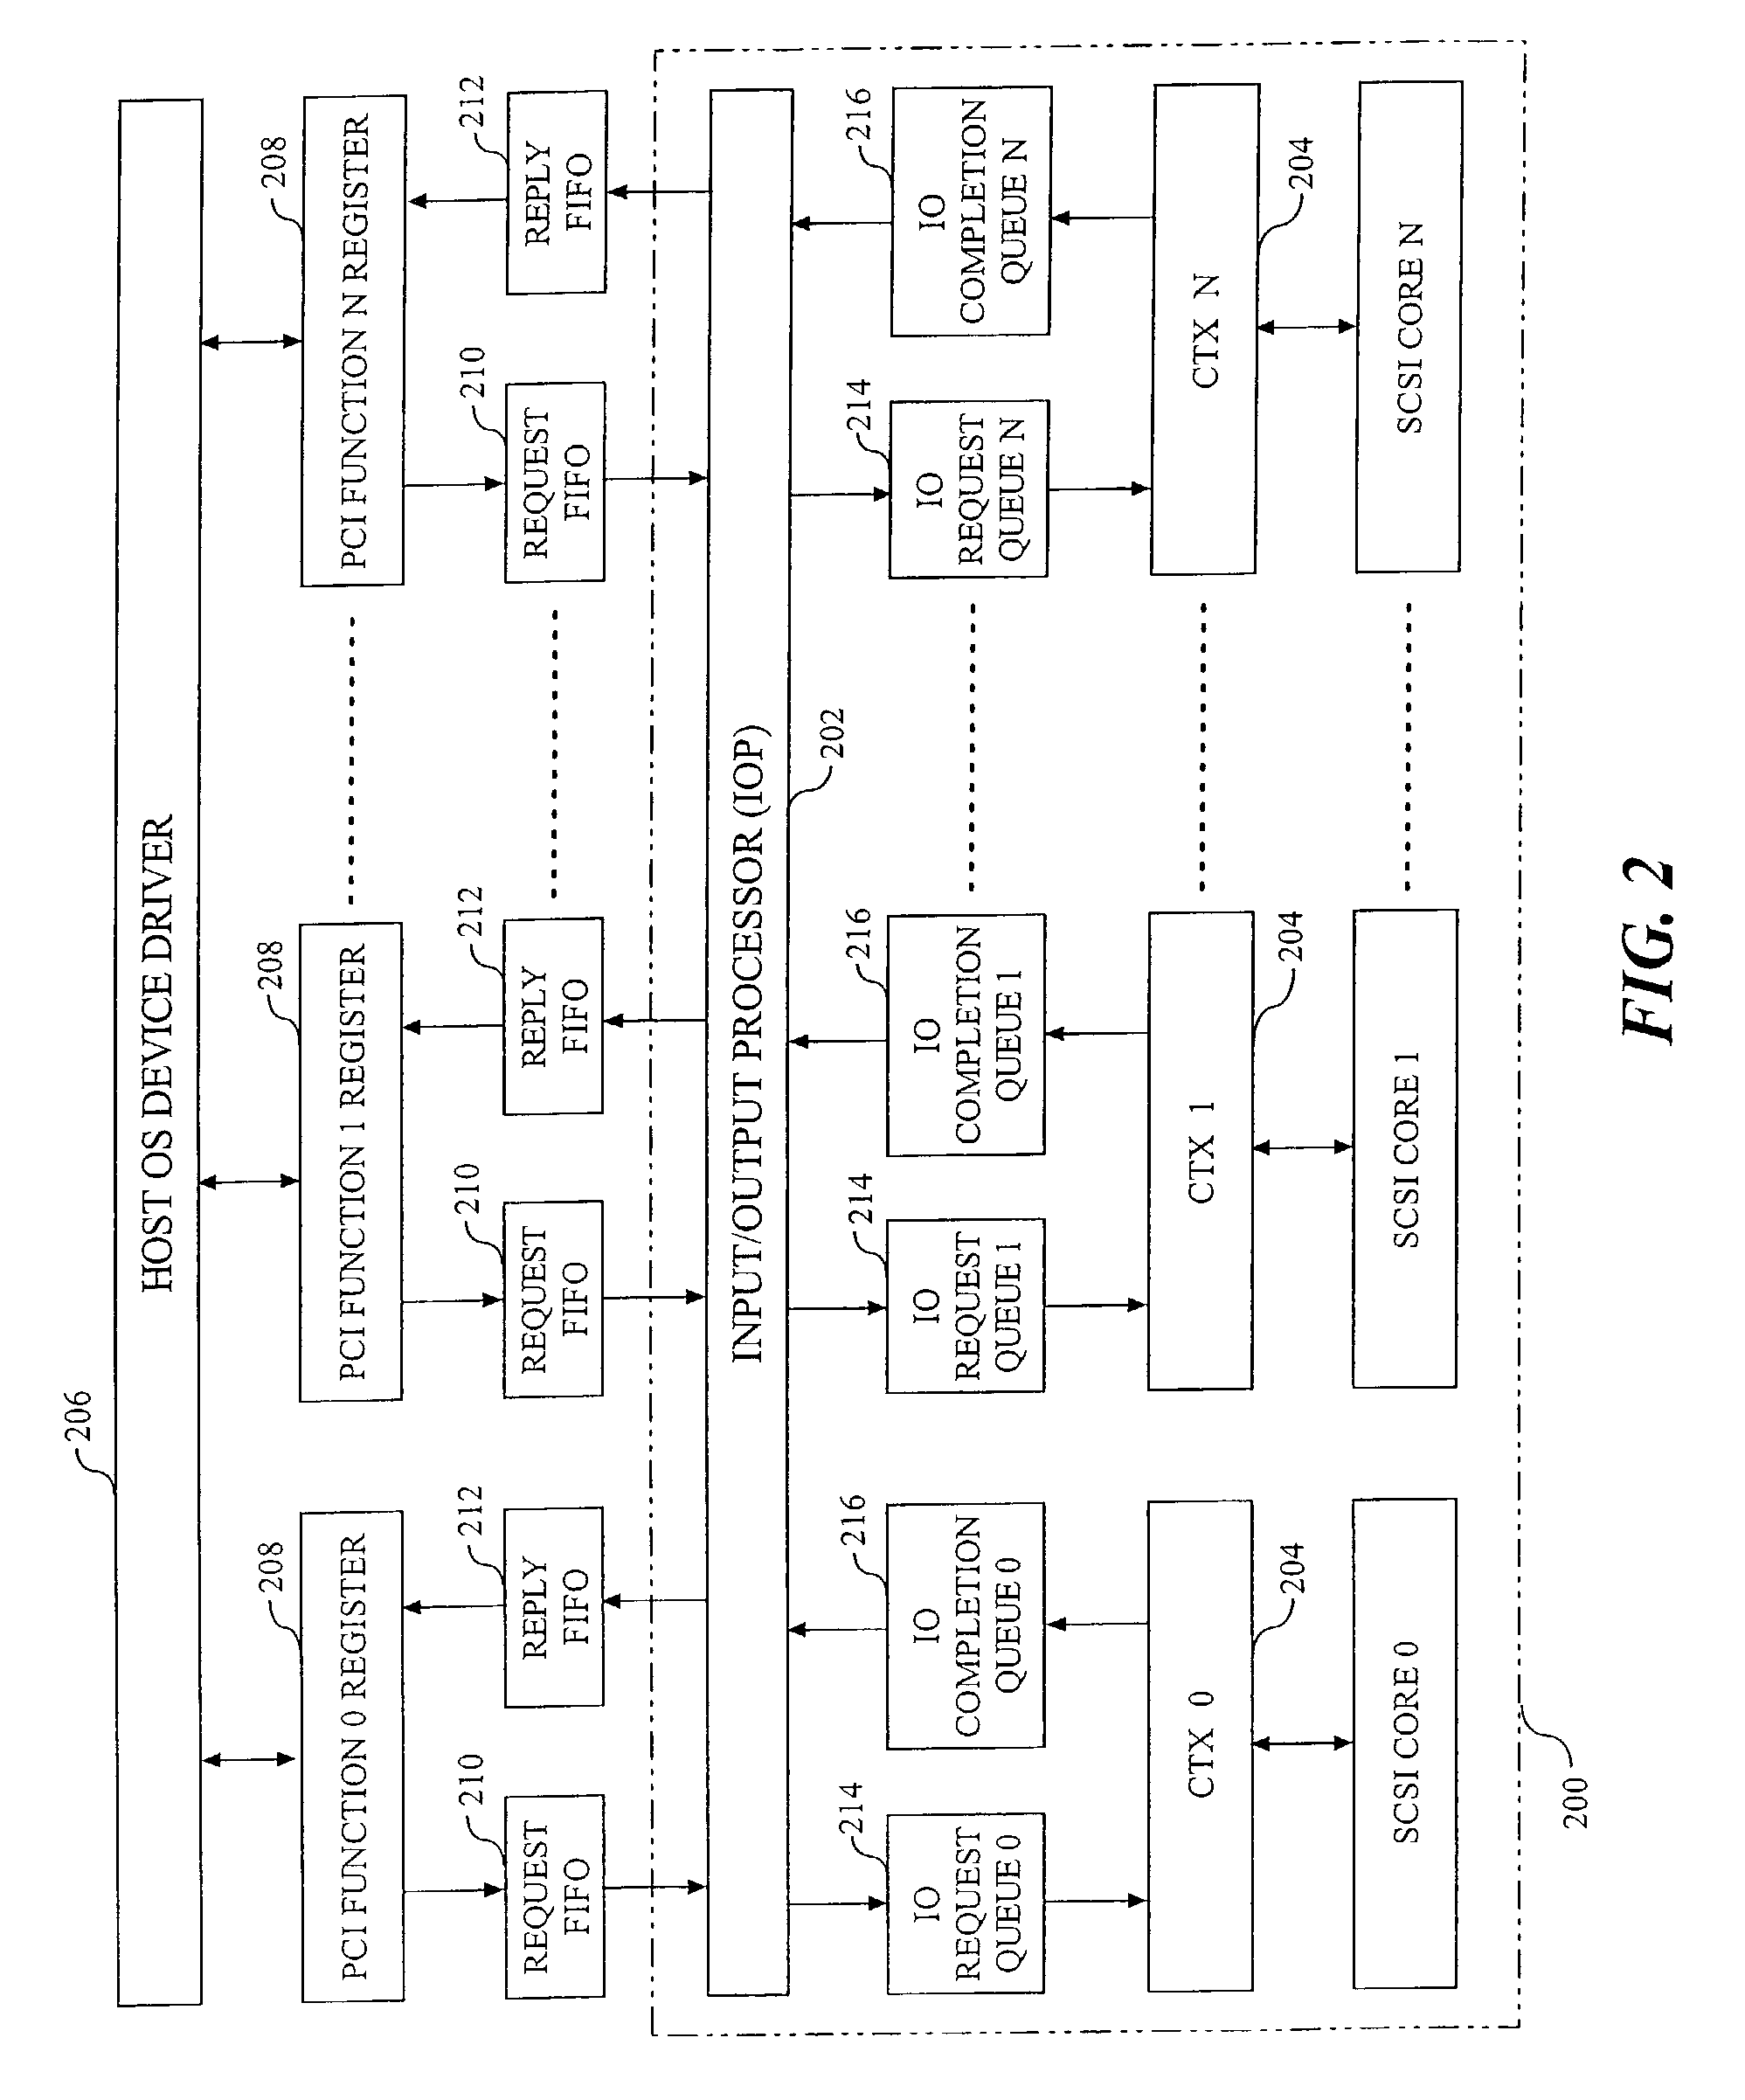 Apparatus and method for dynamically enabling and disabling interrupt coalescing in data processing system